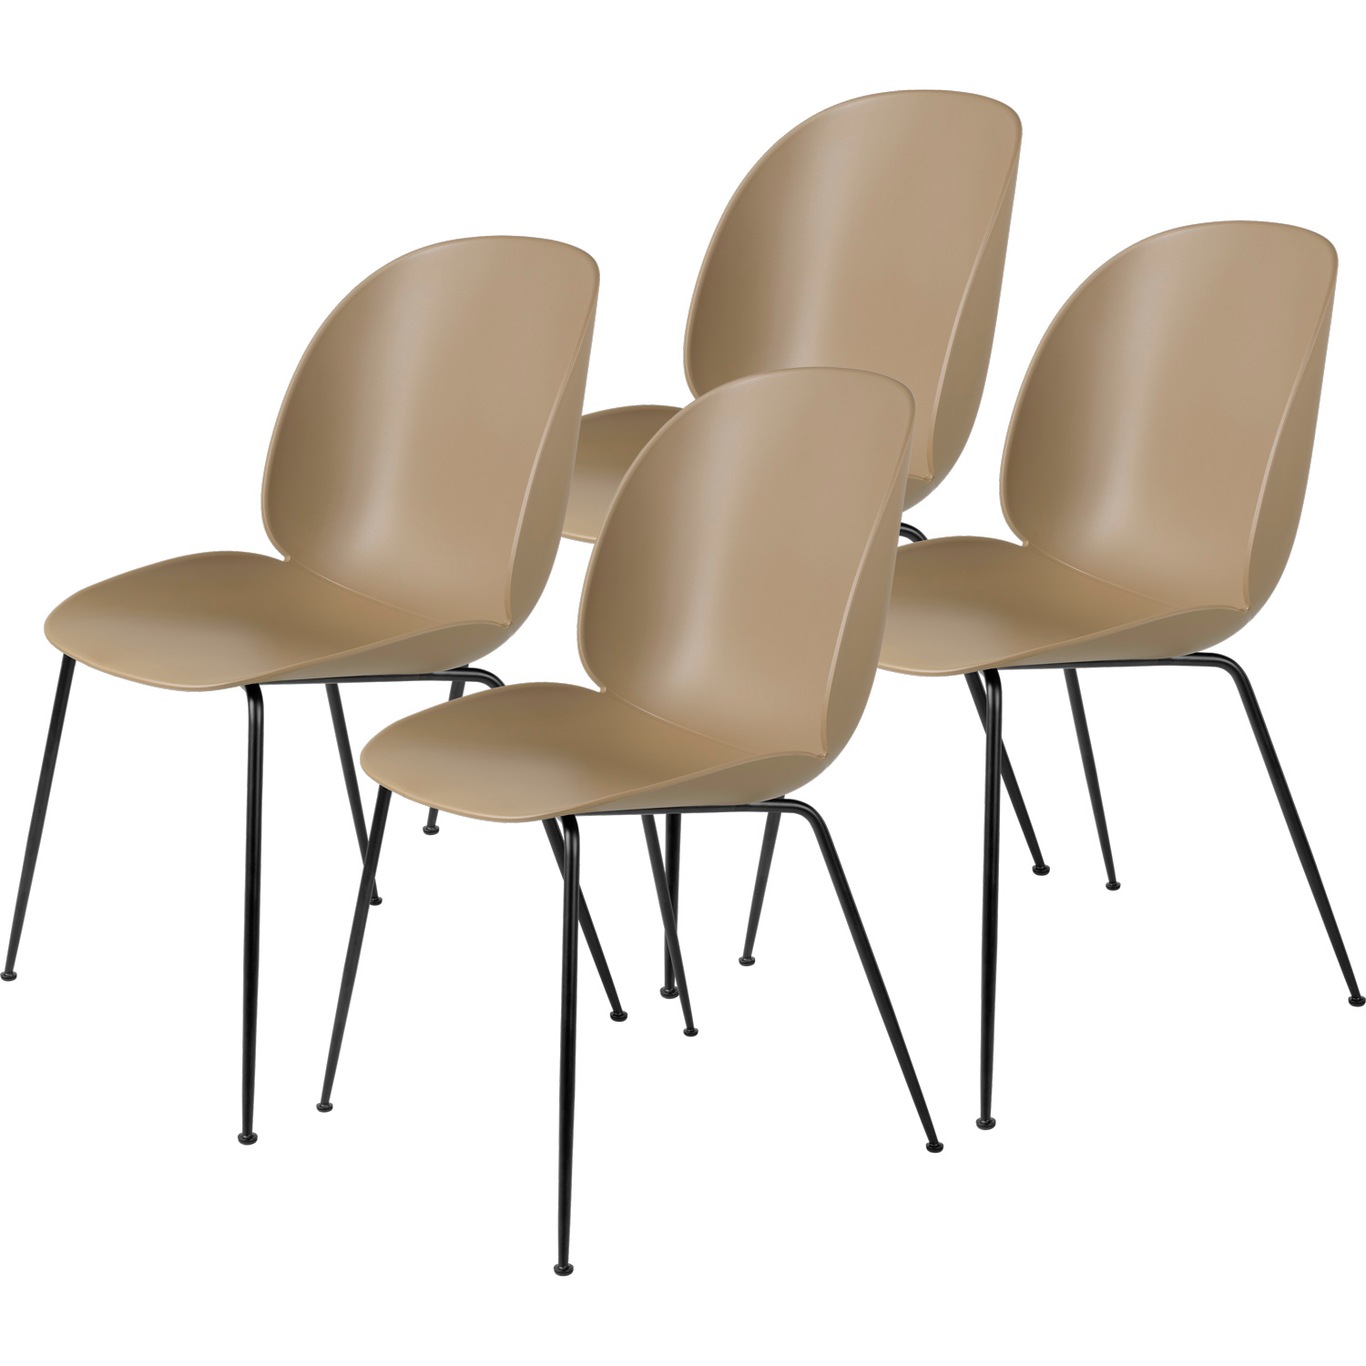 Beetle Dining Chair Unupholstered, Conic Base Black, Set Of 4, Pebble Brown